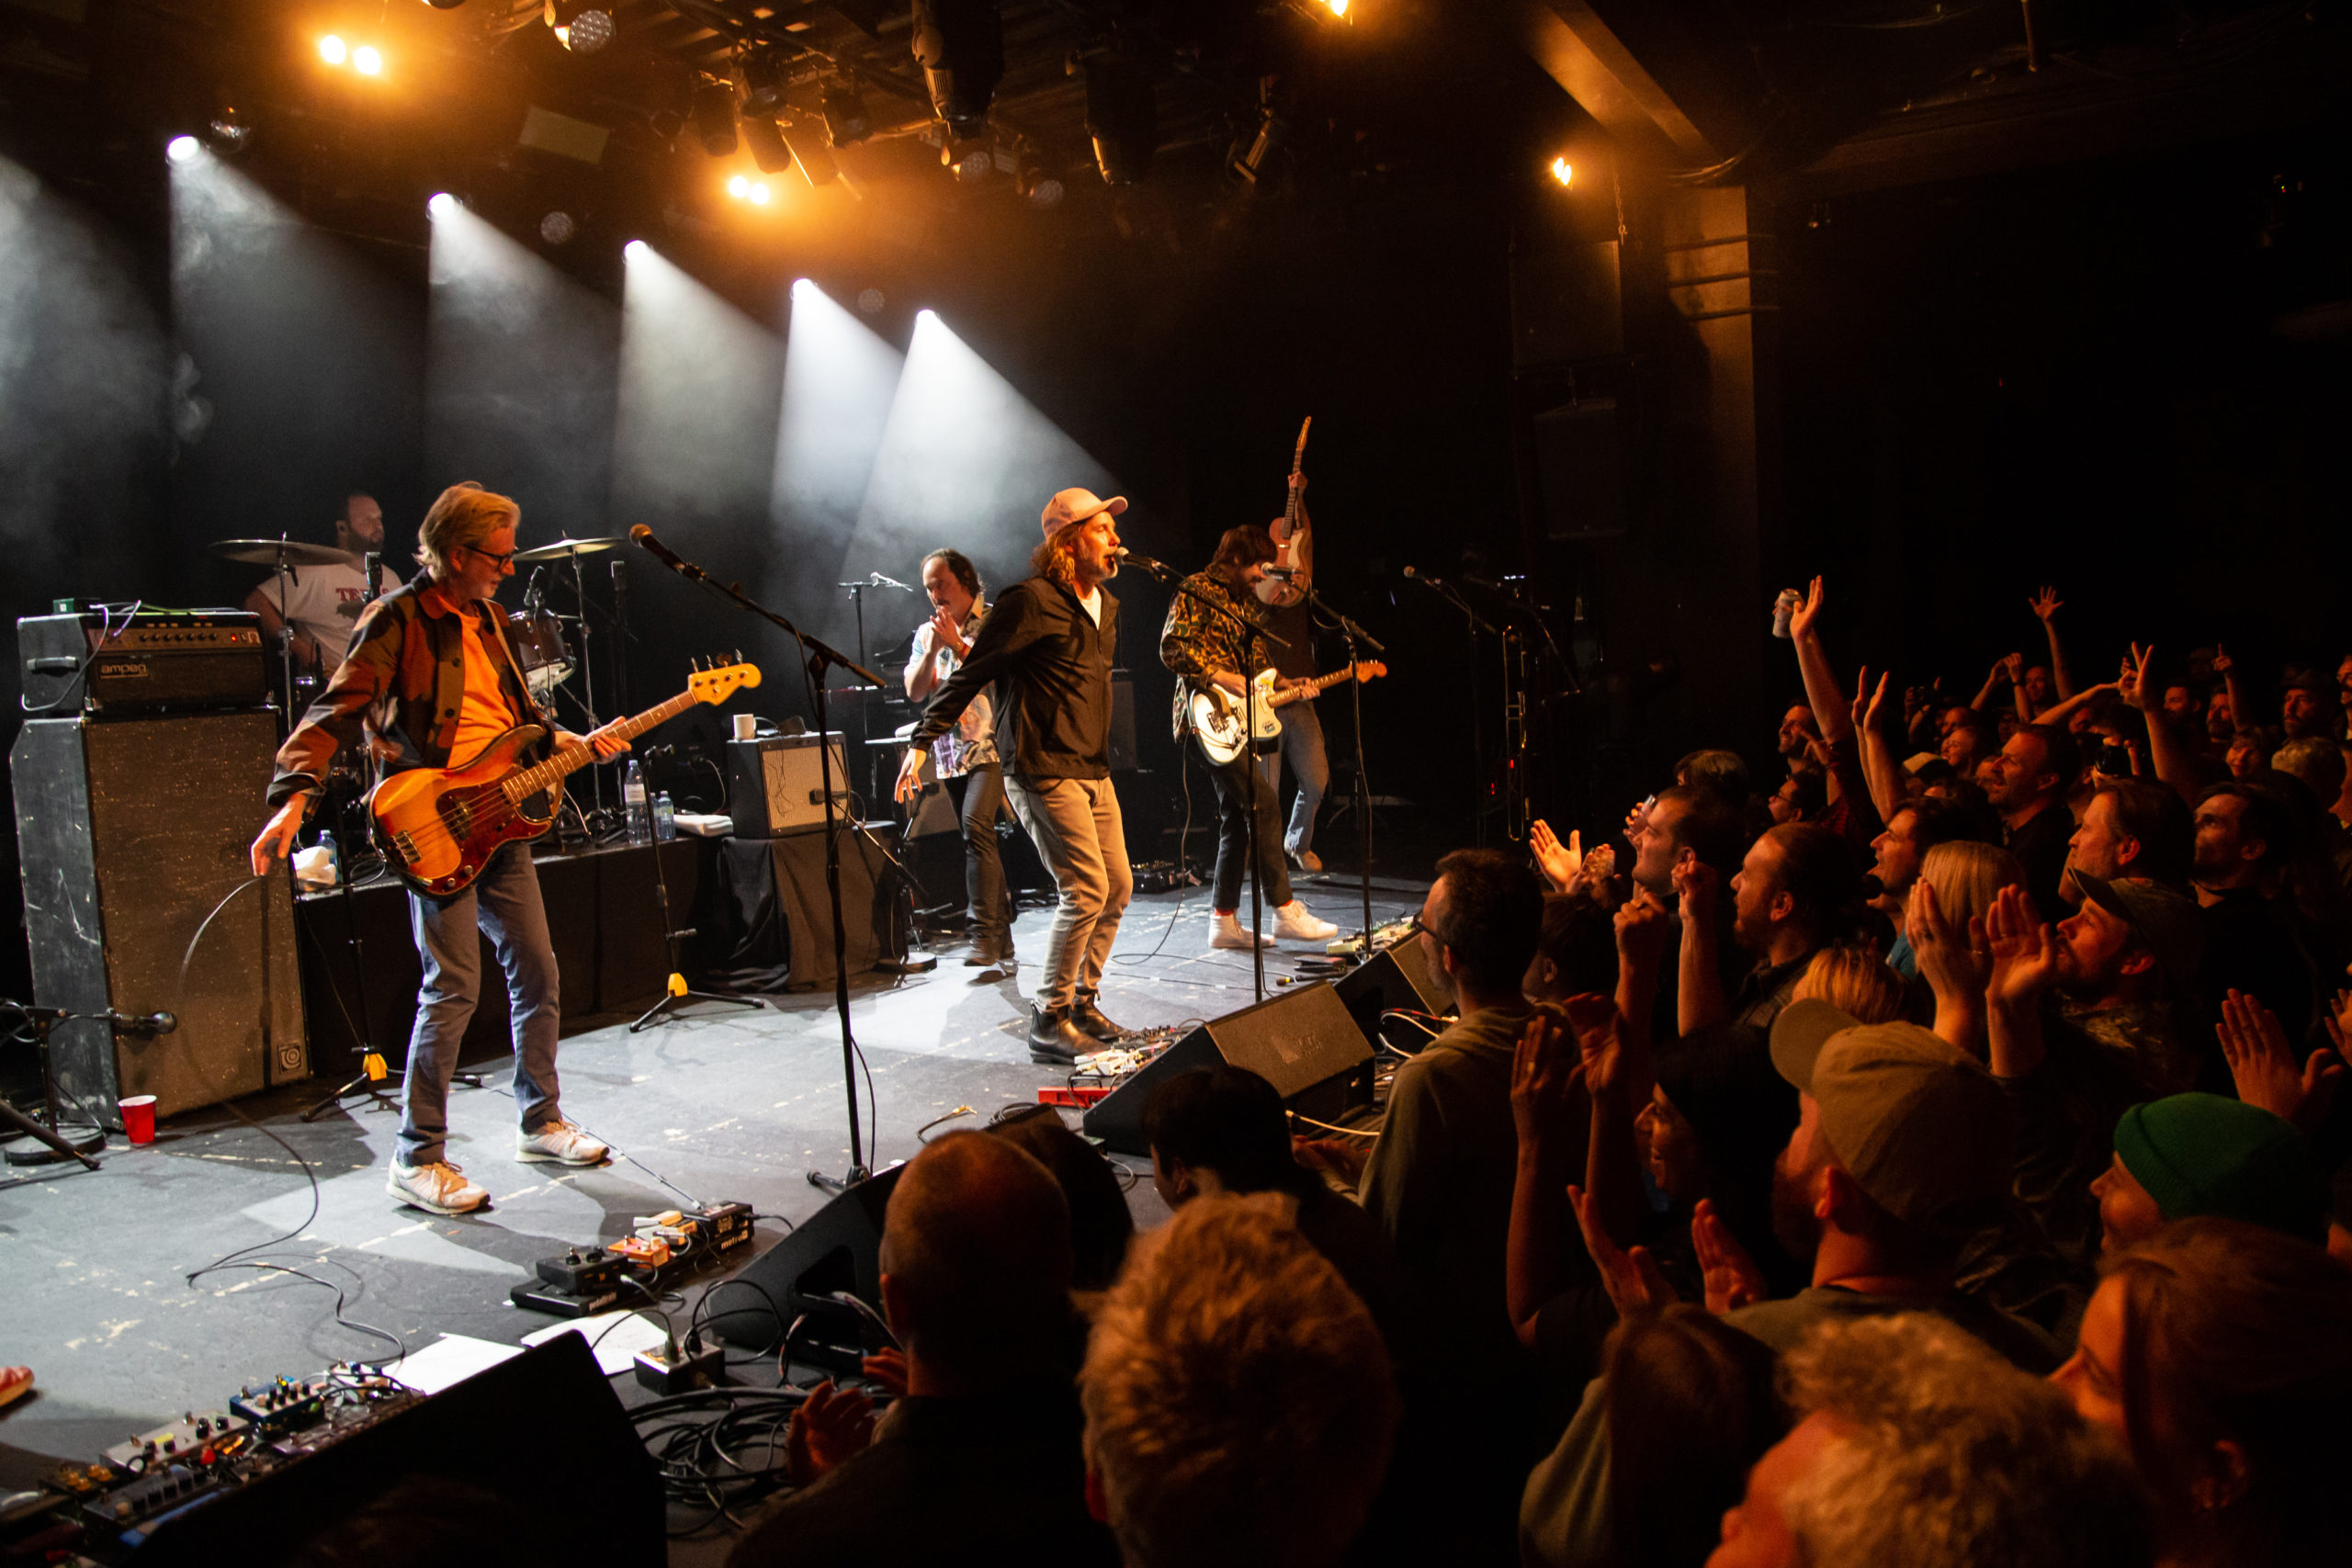 Nine members of Broken Social Scene begin their tour at the Commodore Ballroom fronted by Kevin Drew